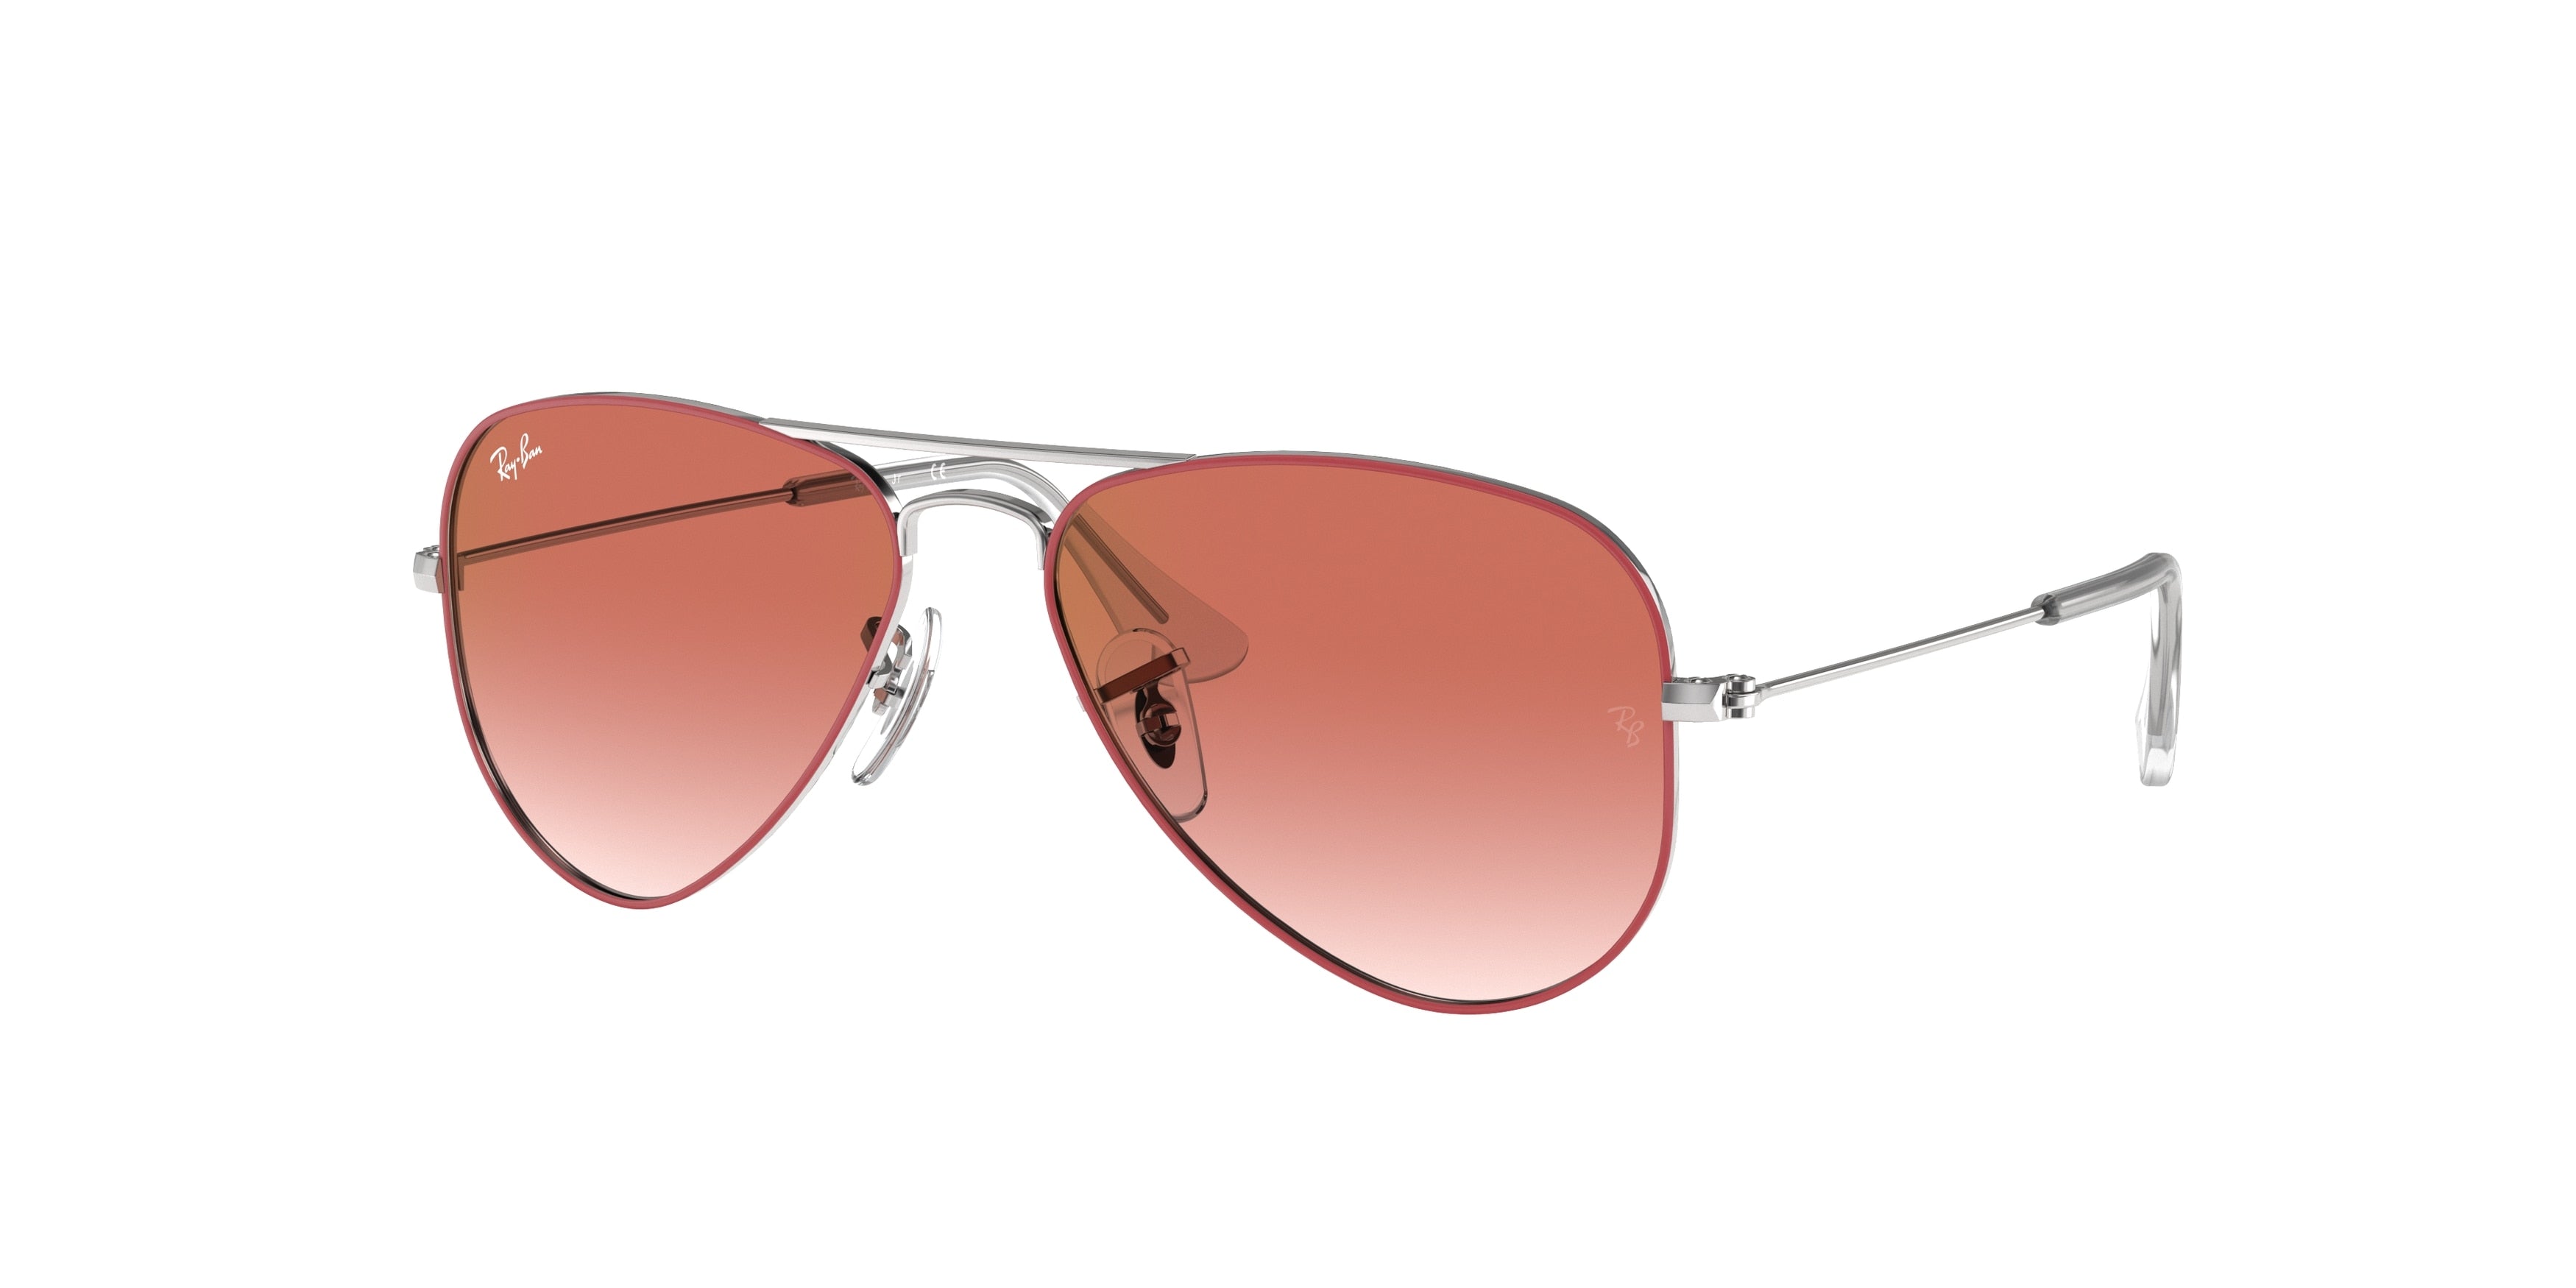 Ray-Ban Junior JUNIOR AVIATOR RJ9506S Pilot Sunglasses  274/V0-Red On Silver 50-120-13 - Color Map Red